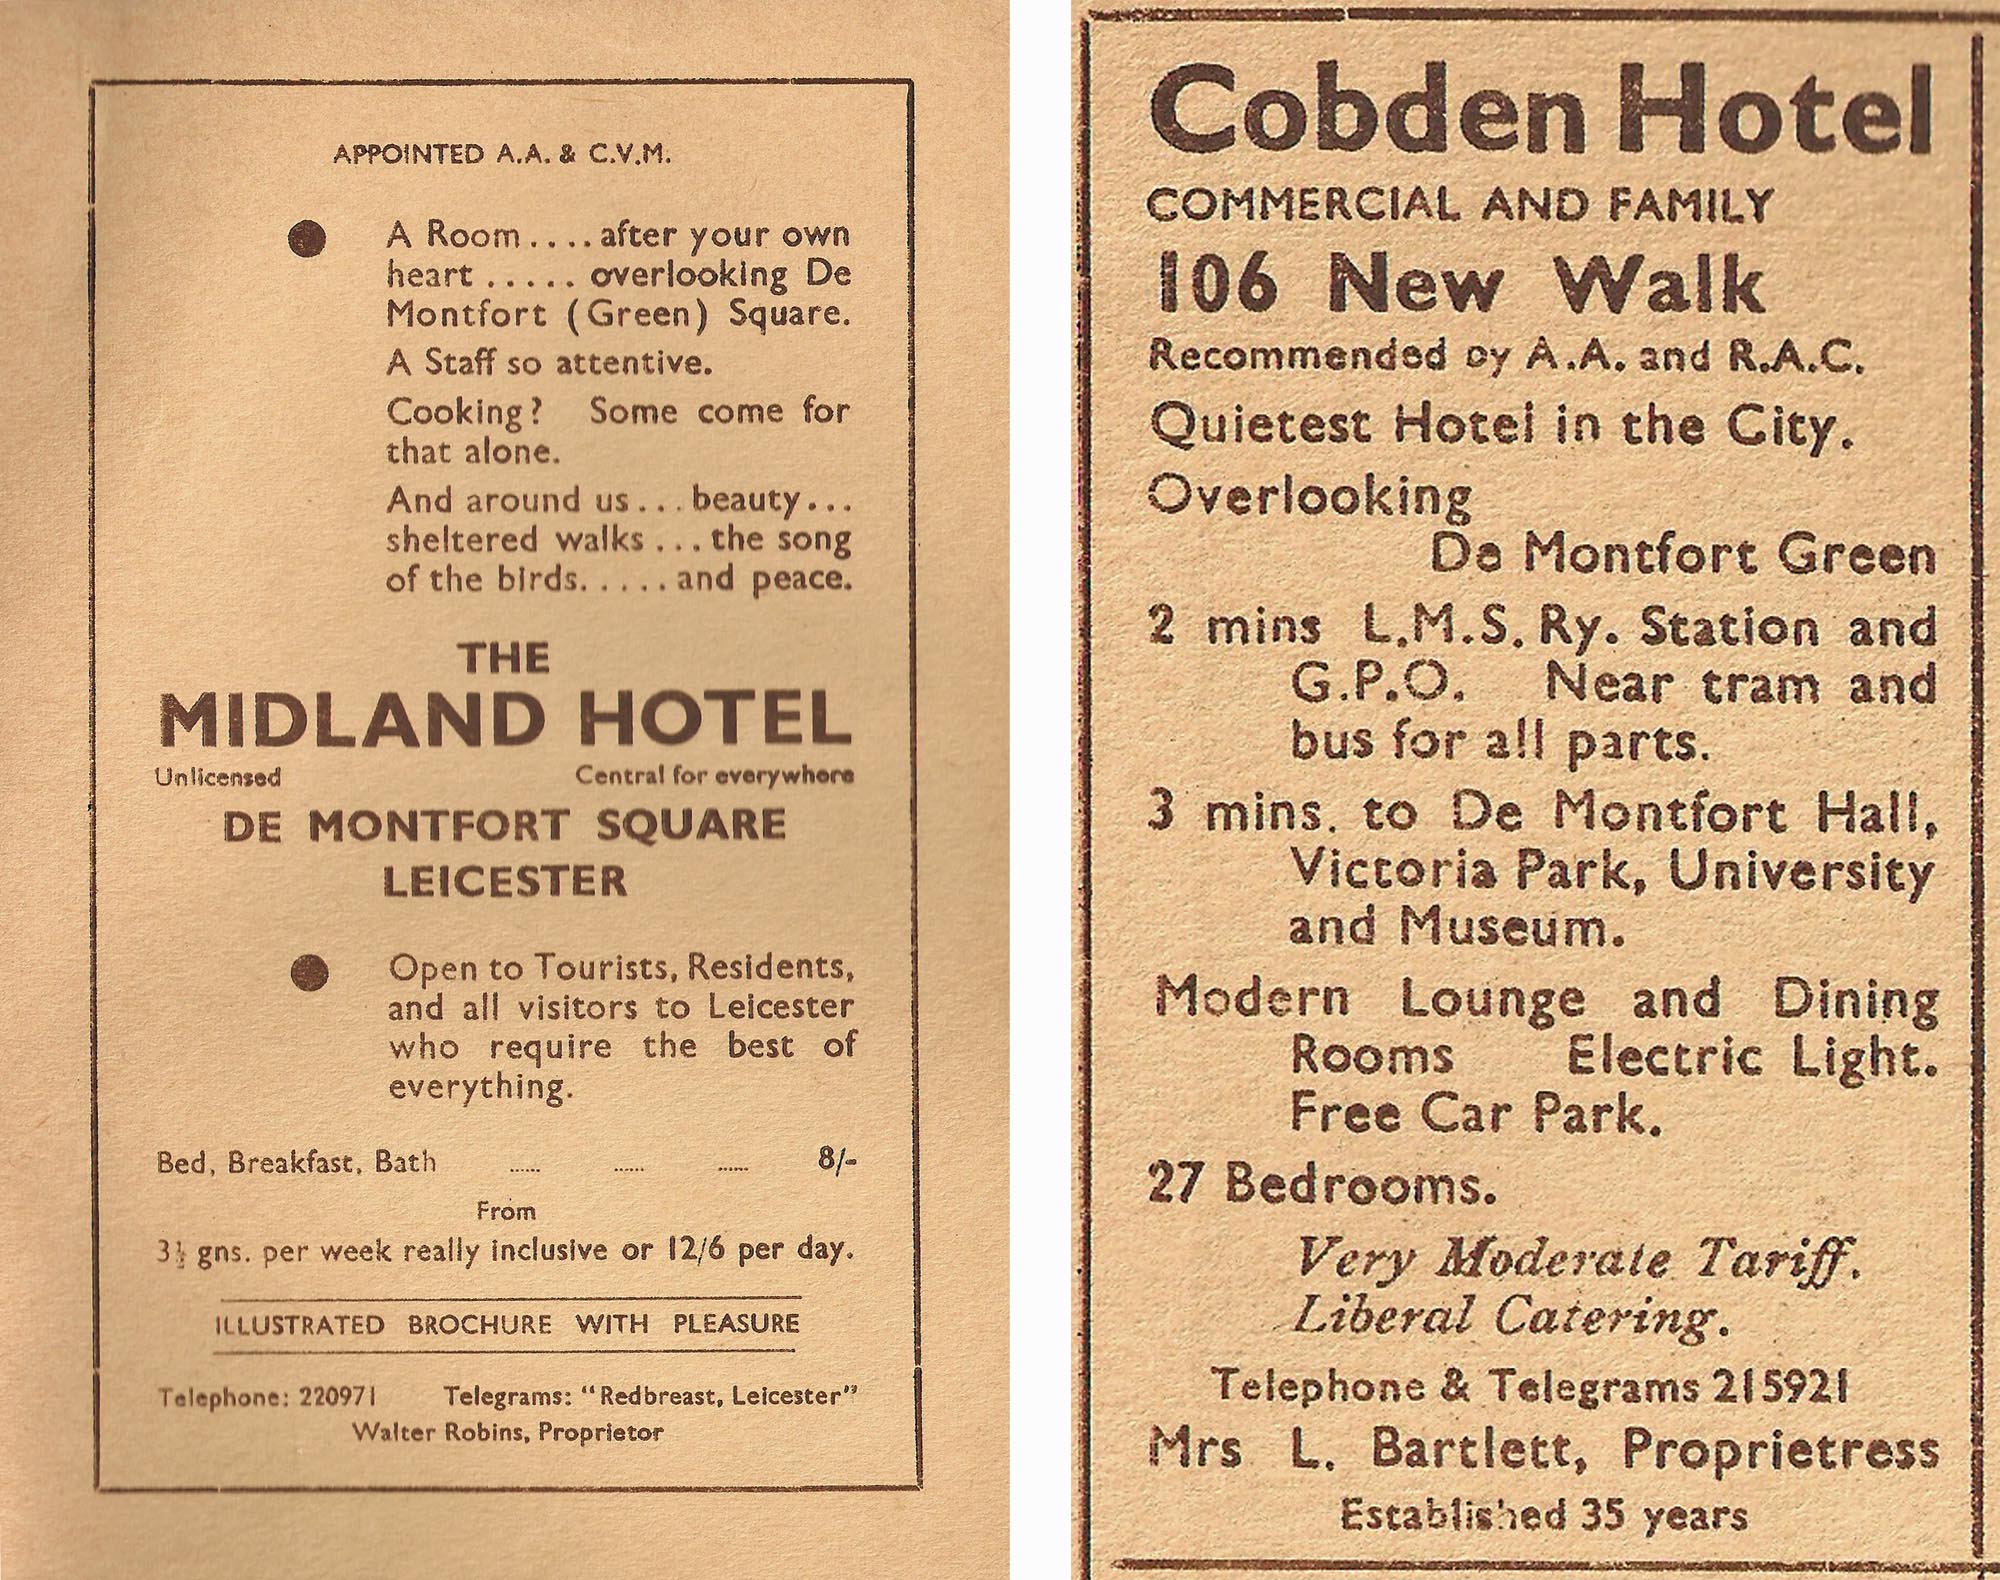 Hotel adverts from a 1930s newspaper -